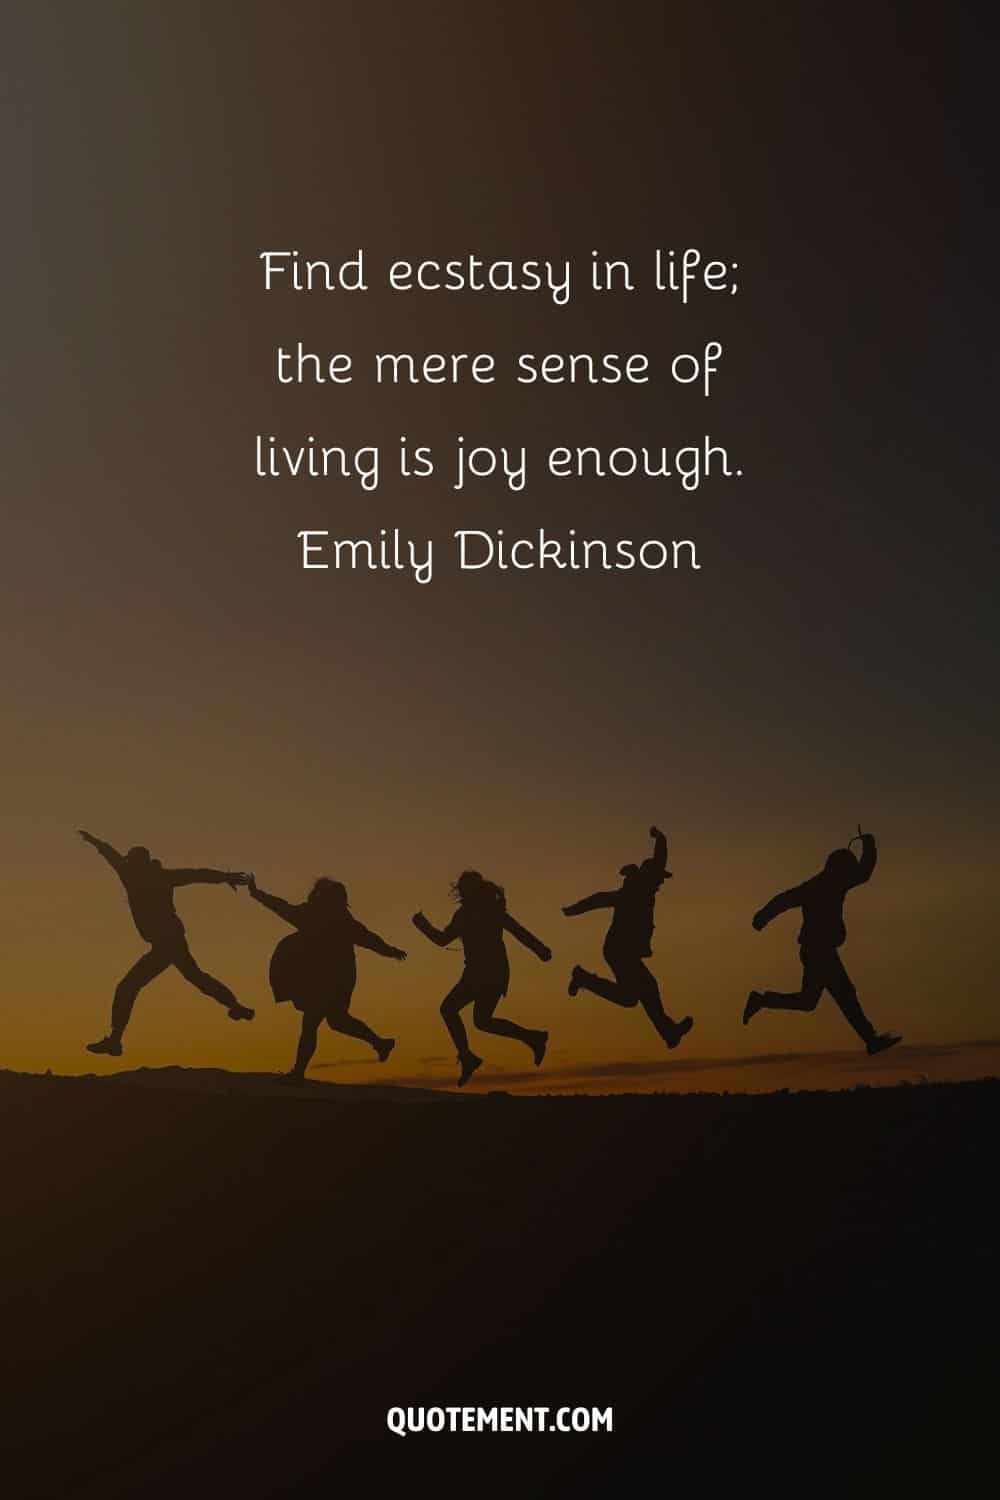 Find ecstasy in life; the mere sense of living is joy enough